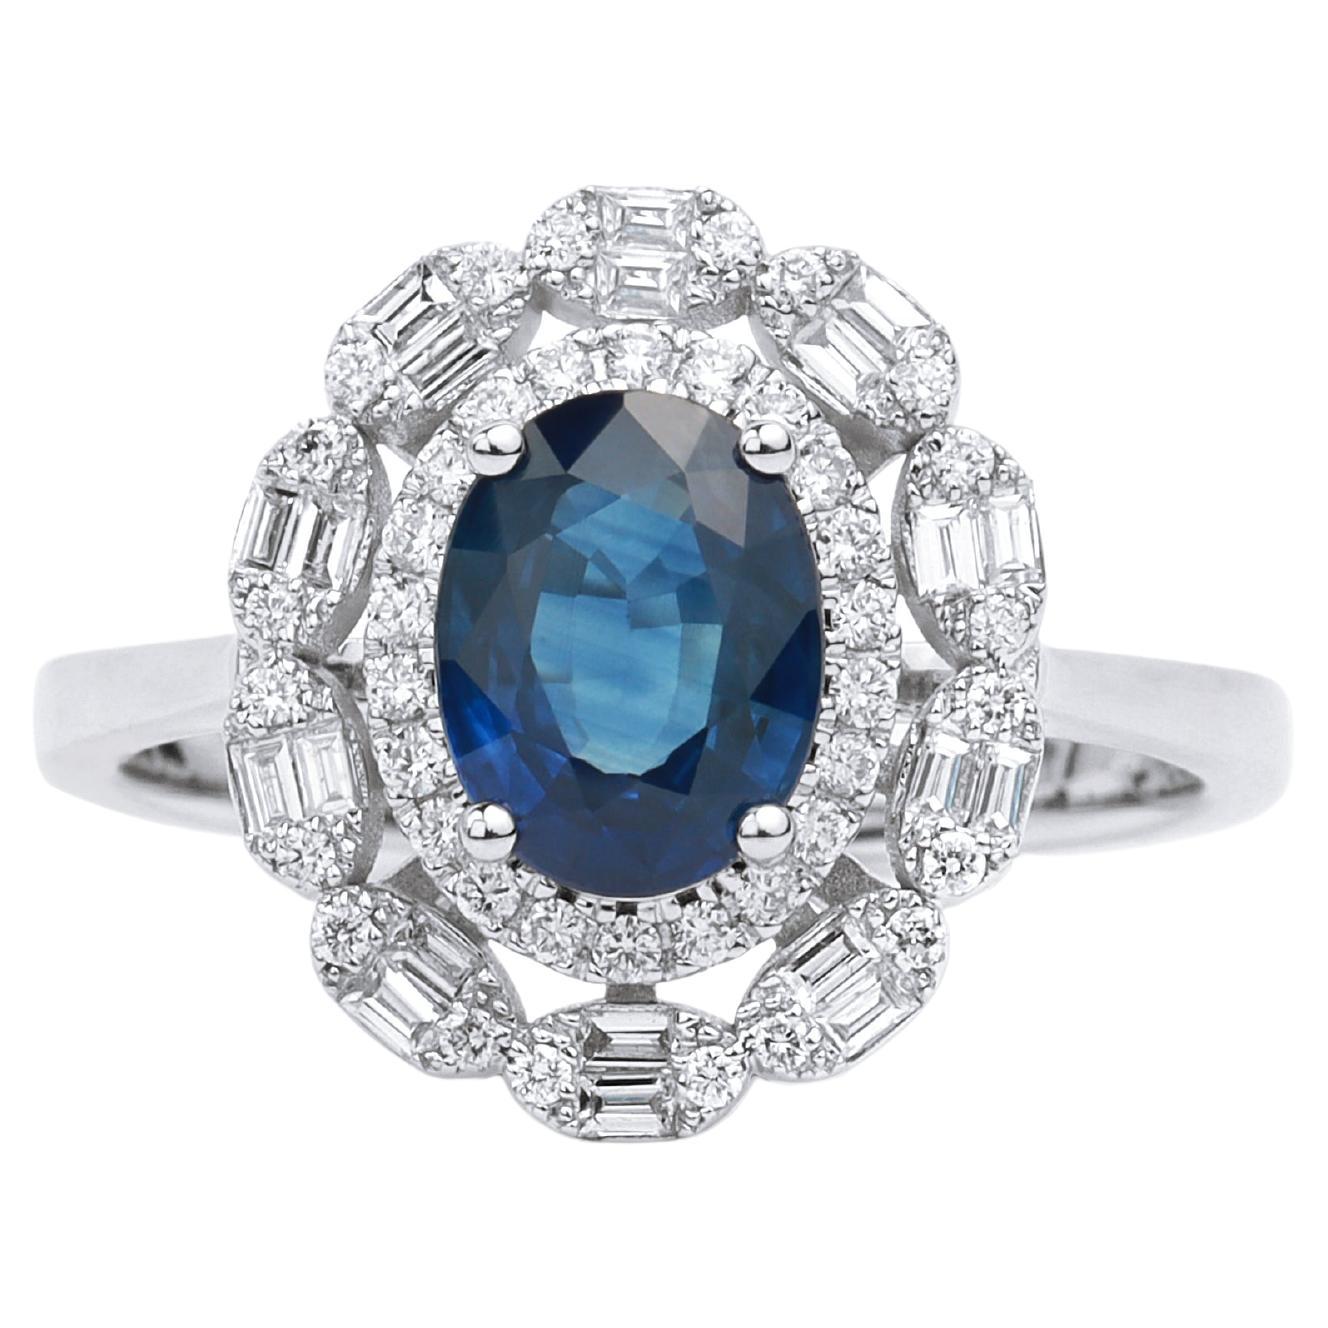 Oval Sapphire Diamond Halo Cocktail Engagement Ring in 18 karat White Gold